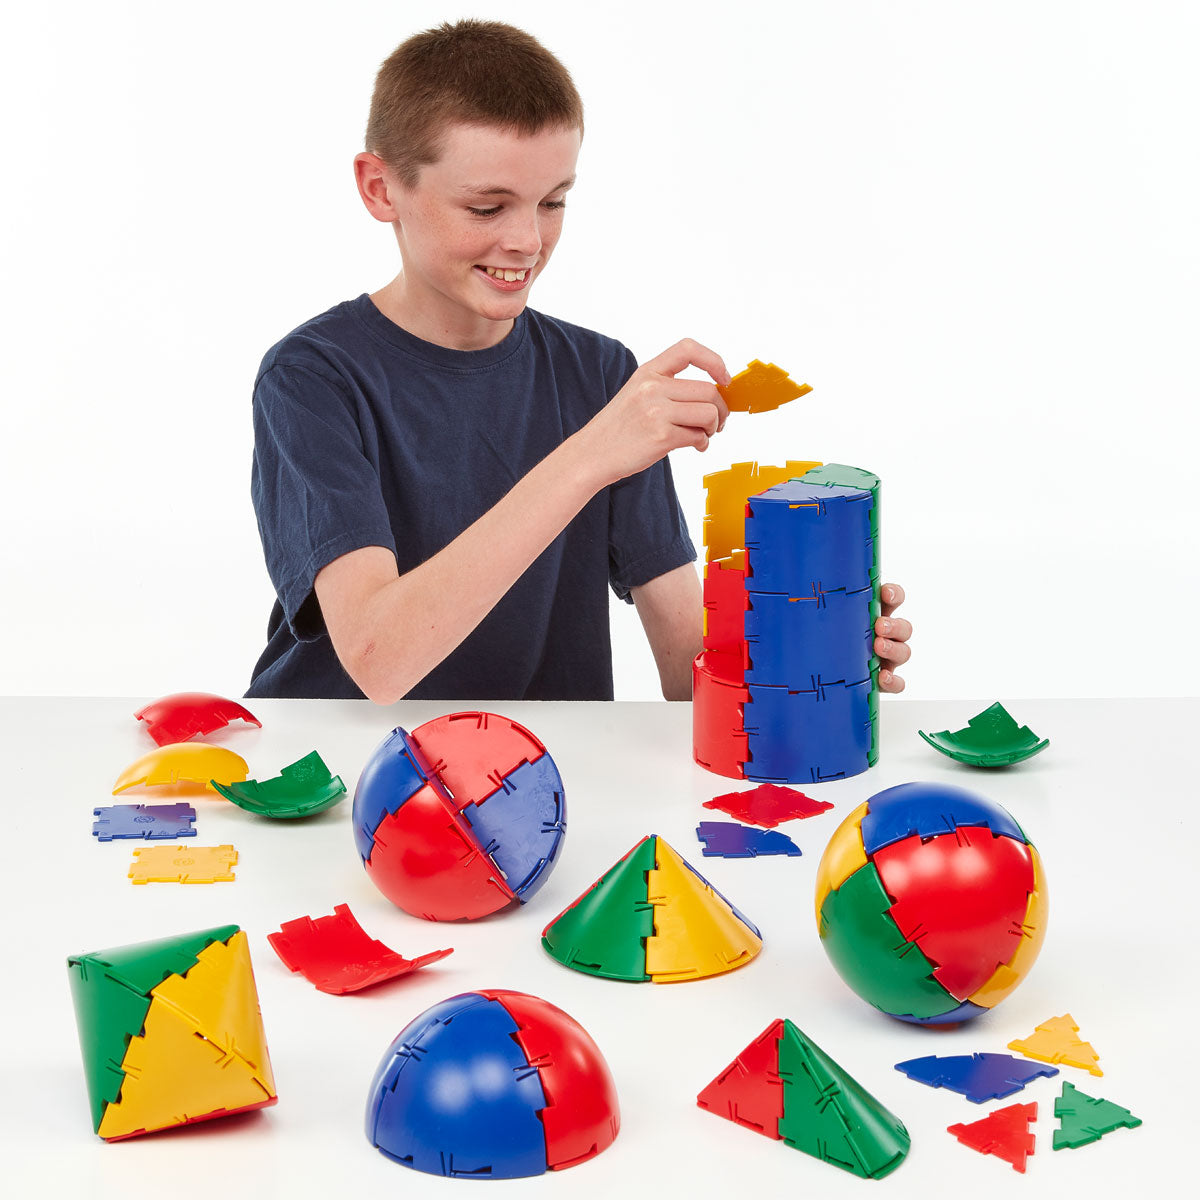 Polydron Sphera Class Set, Introduce your classroom to the fascinating world of spherical models with the Polydron Sphera Class Set. This comprehensive set is designed to engage and inspire students as they build and explore over 16 different spherical models together.Containing a total of 196 pieces, this class set provides ample resources for large groups of children to work collaboratively. The set includes 36 sphere pieces, 72 quadrant pieces, 16 cone pieces, 12 cylinder pieces, 20 squares, and 40 right